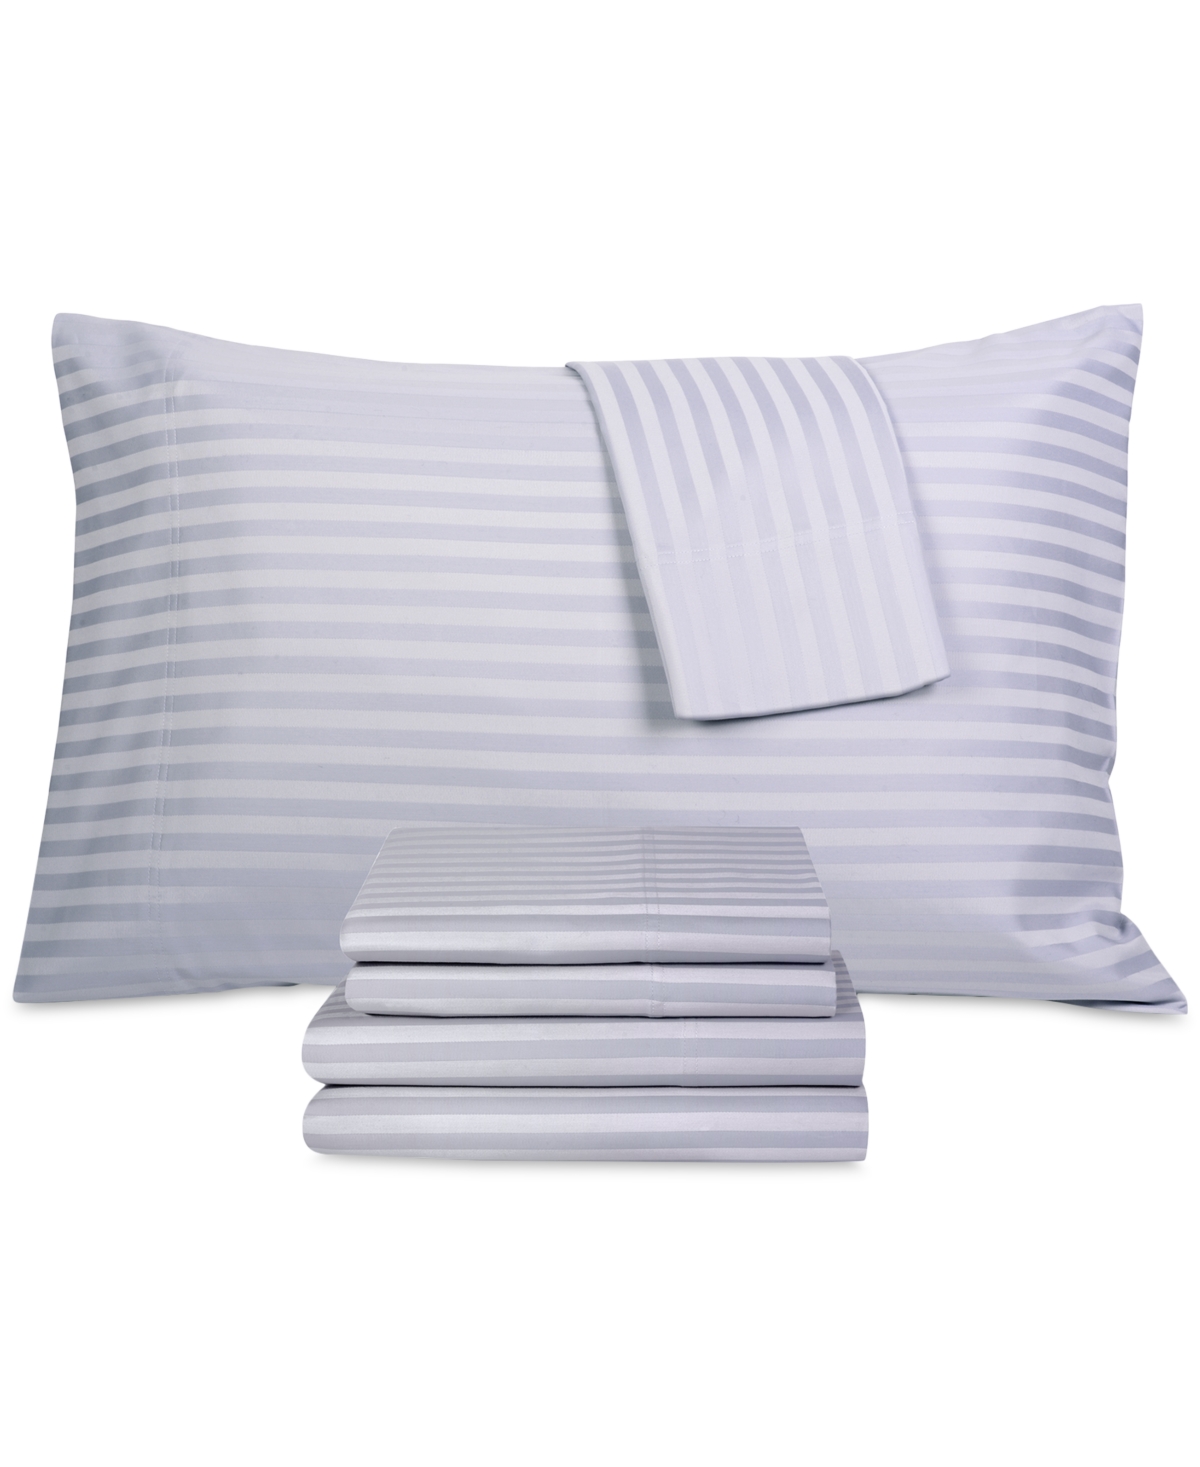 Fairfield Square Collection Brookline Woven Stripe 1400-thread Count 6-pc. Sheet Set, Queen In Sky Blue